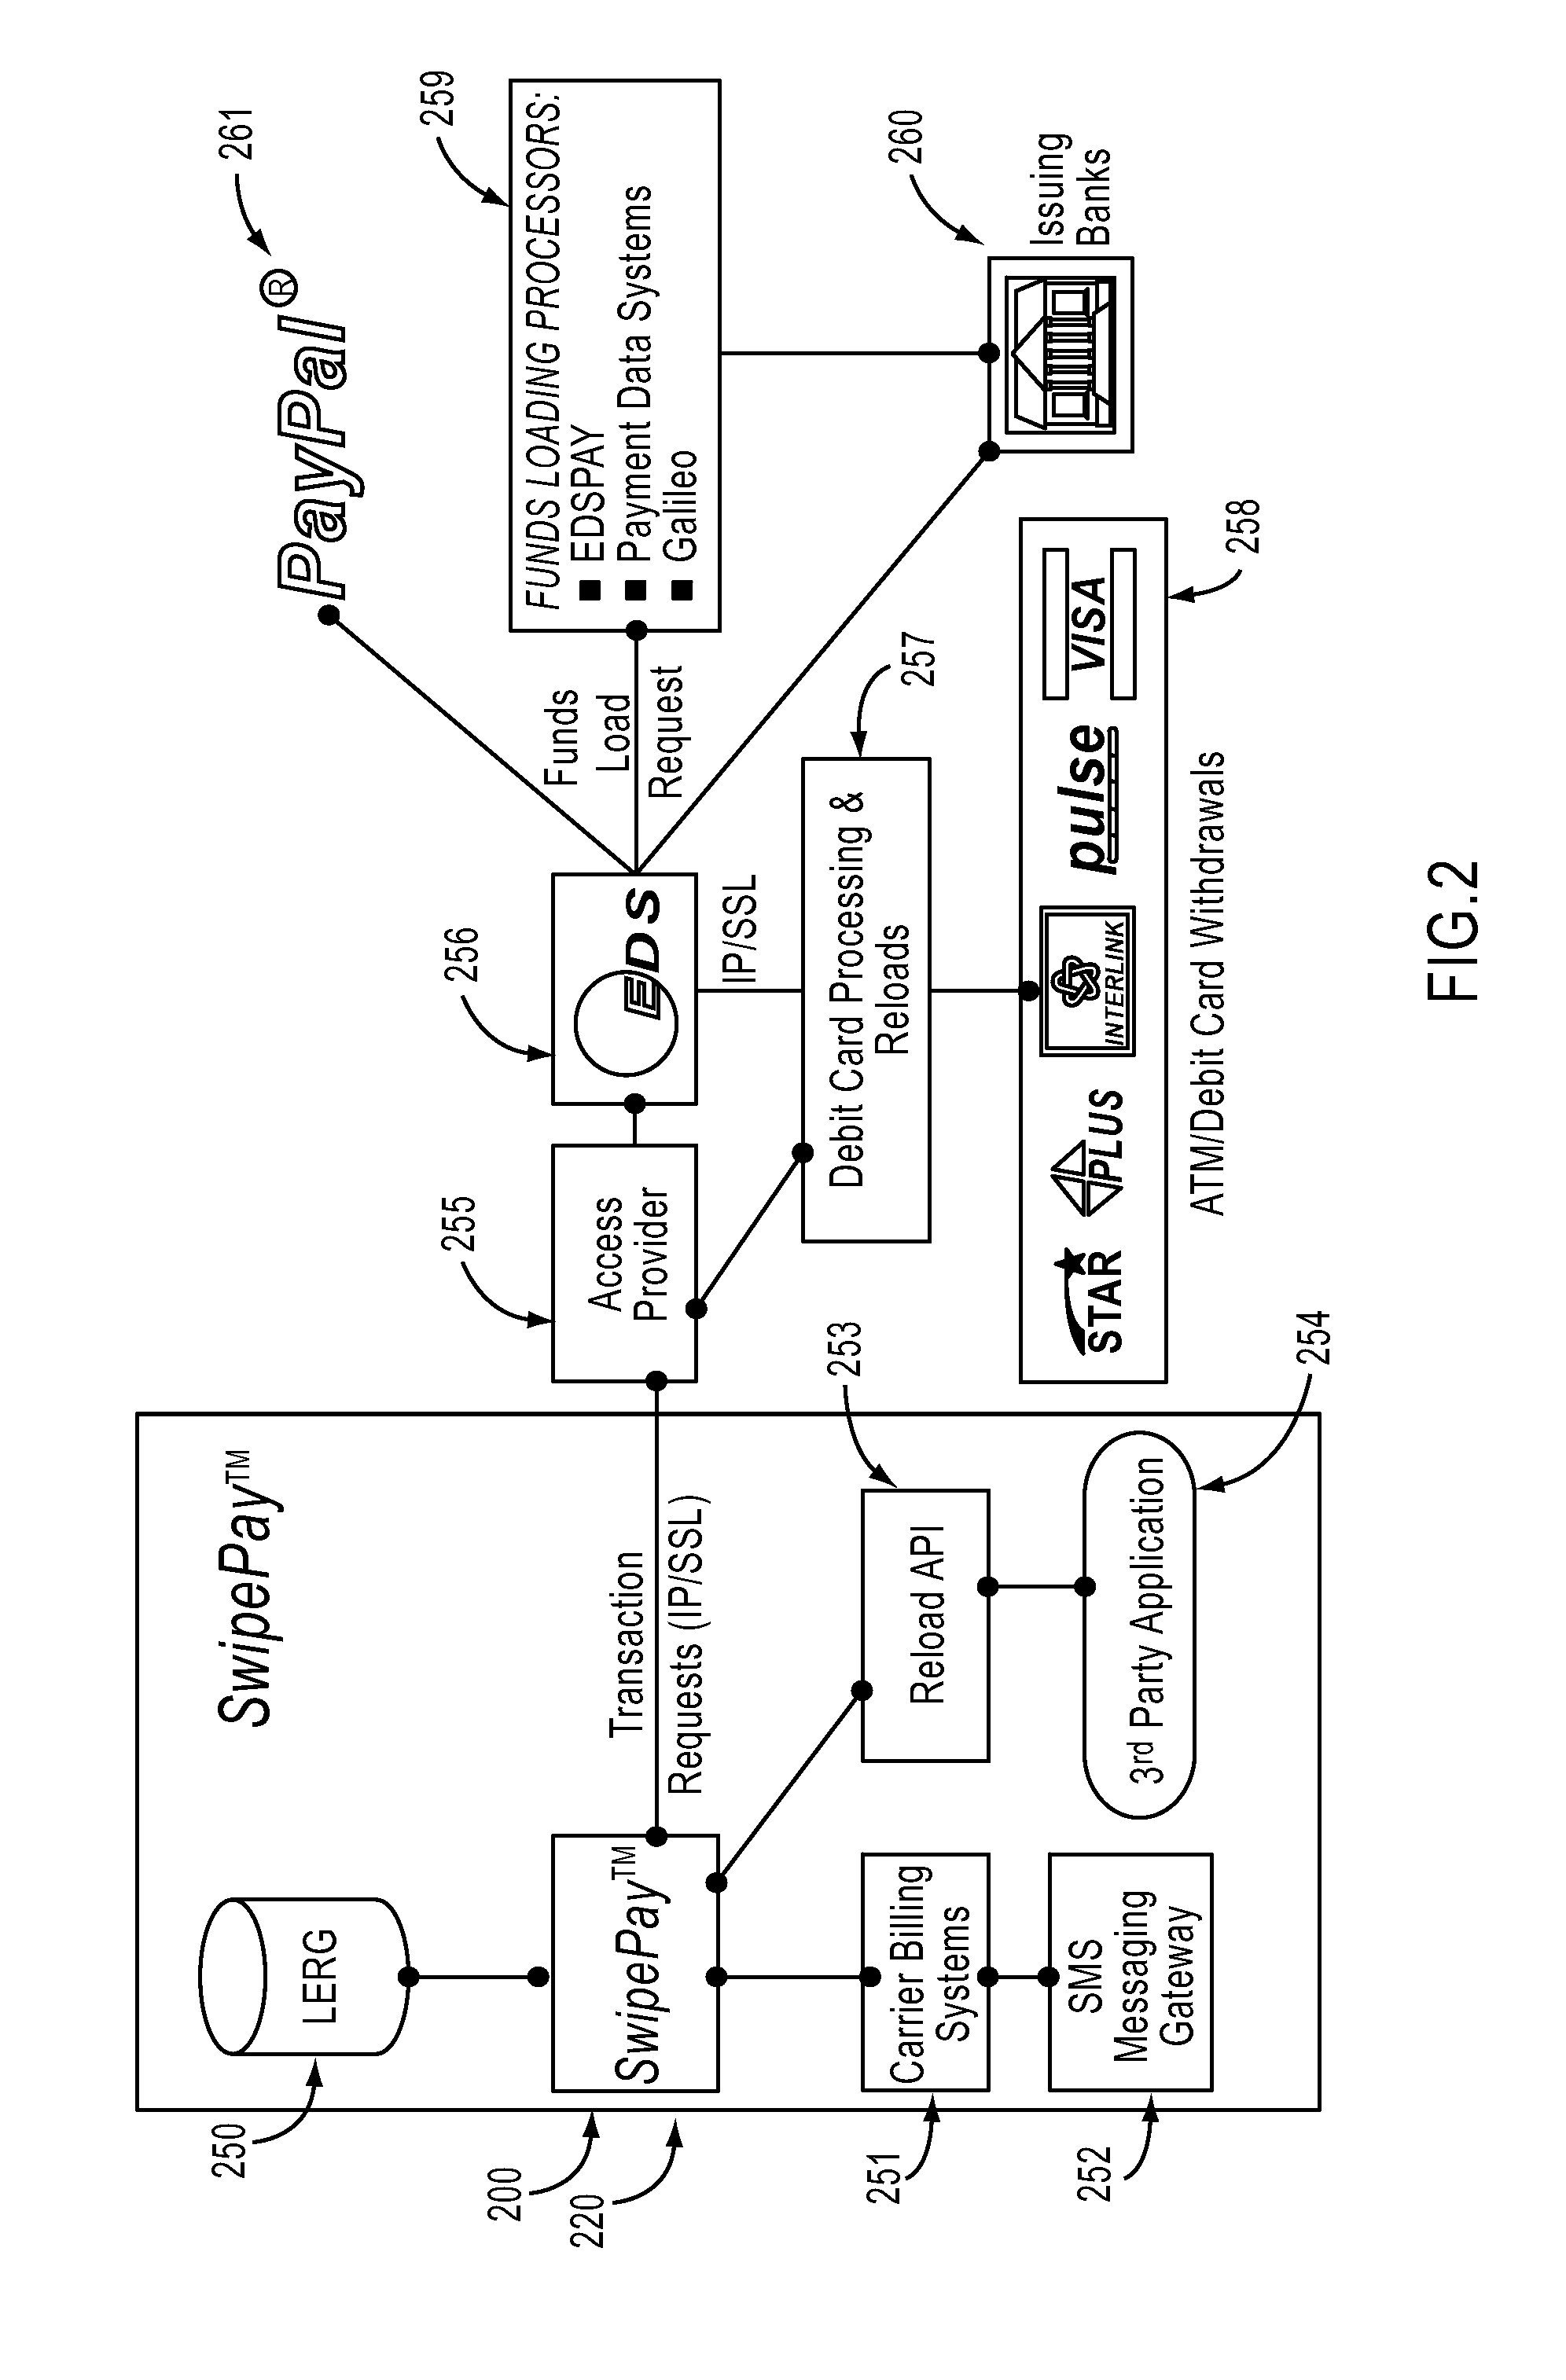 System and method for financial transaction interoperability across multiple mobile networks